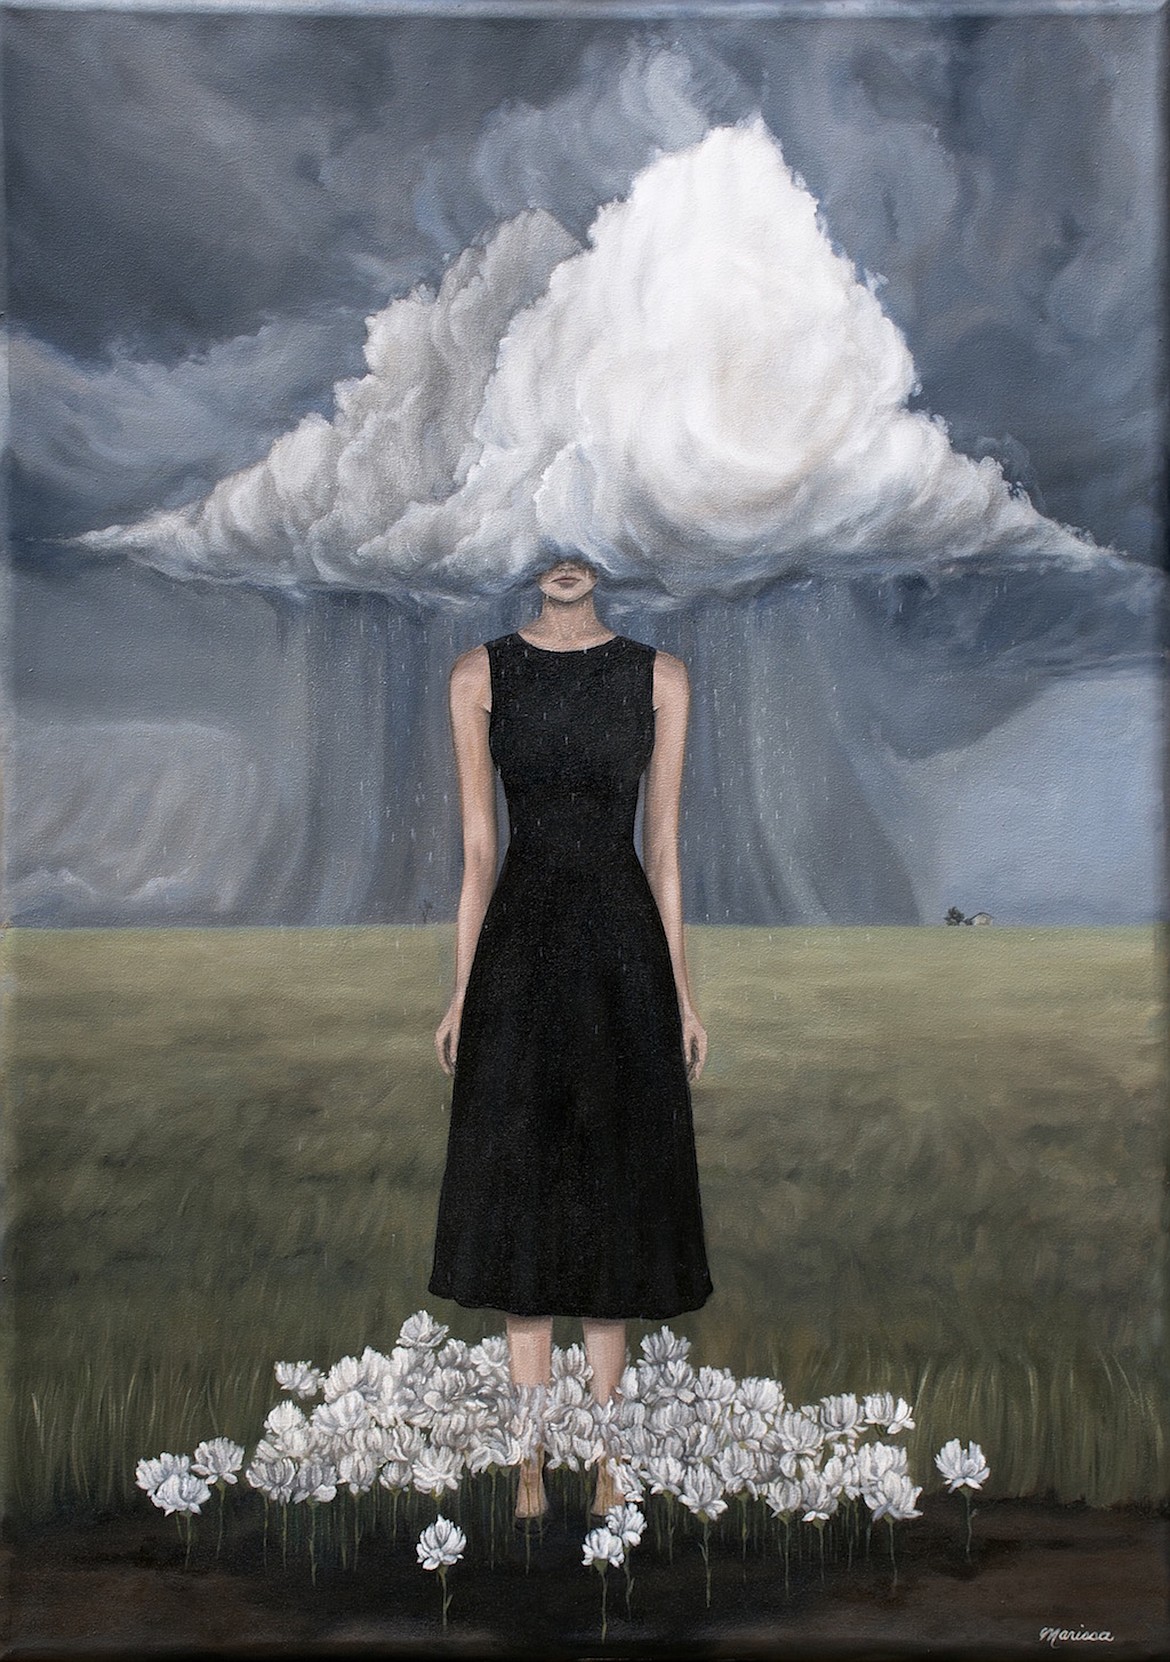 One of Marissa Strickland’s paintings titled “No Rain, No Flowers.”